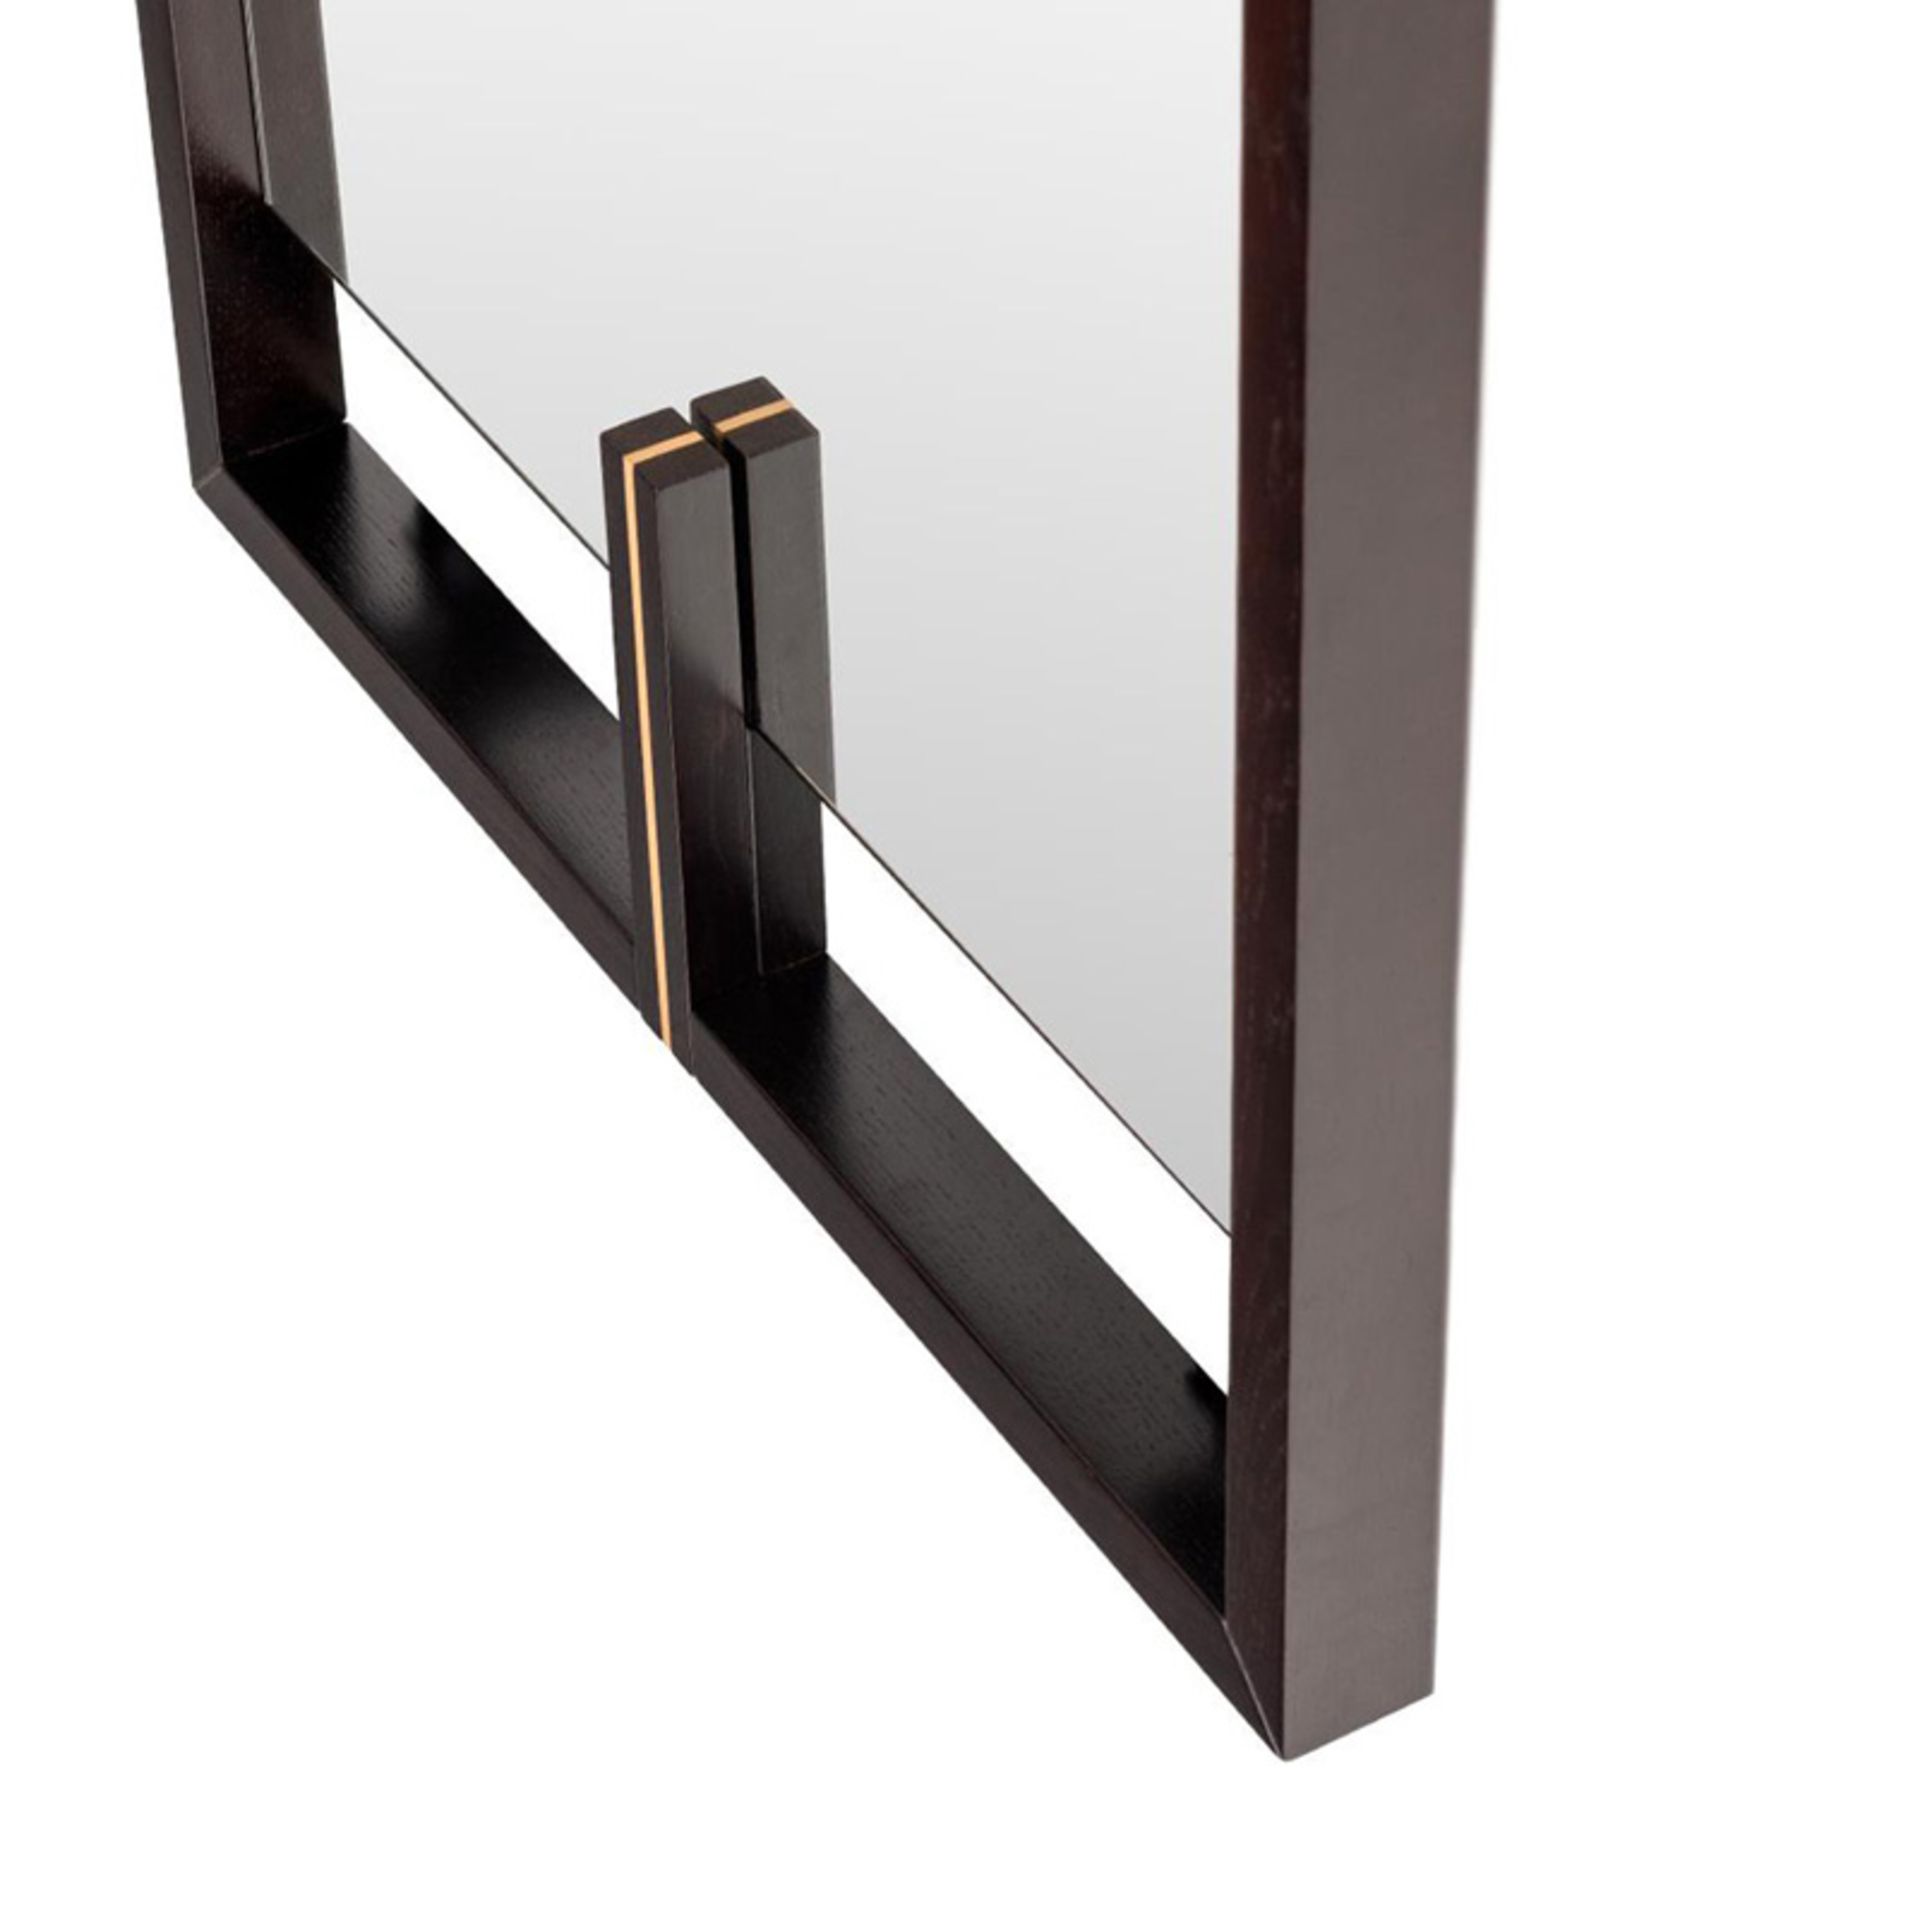 1 x FRATO Lancaster Luxury Mirror With Dark Wood Frame And Brushed Brass Details - RRP £1,288 - Image 5 of 7